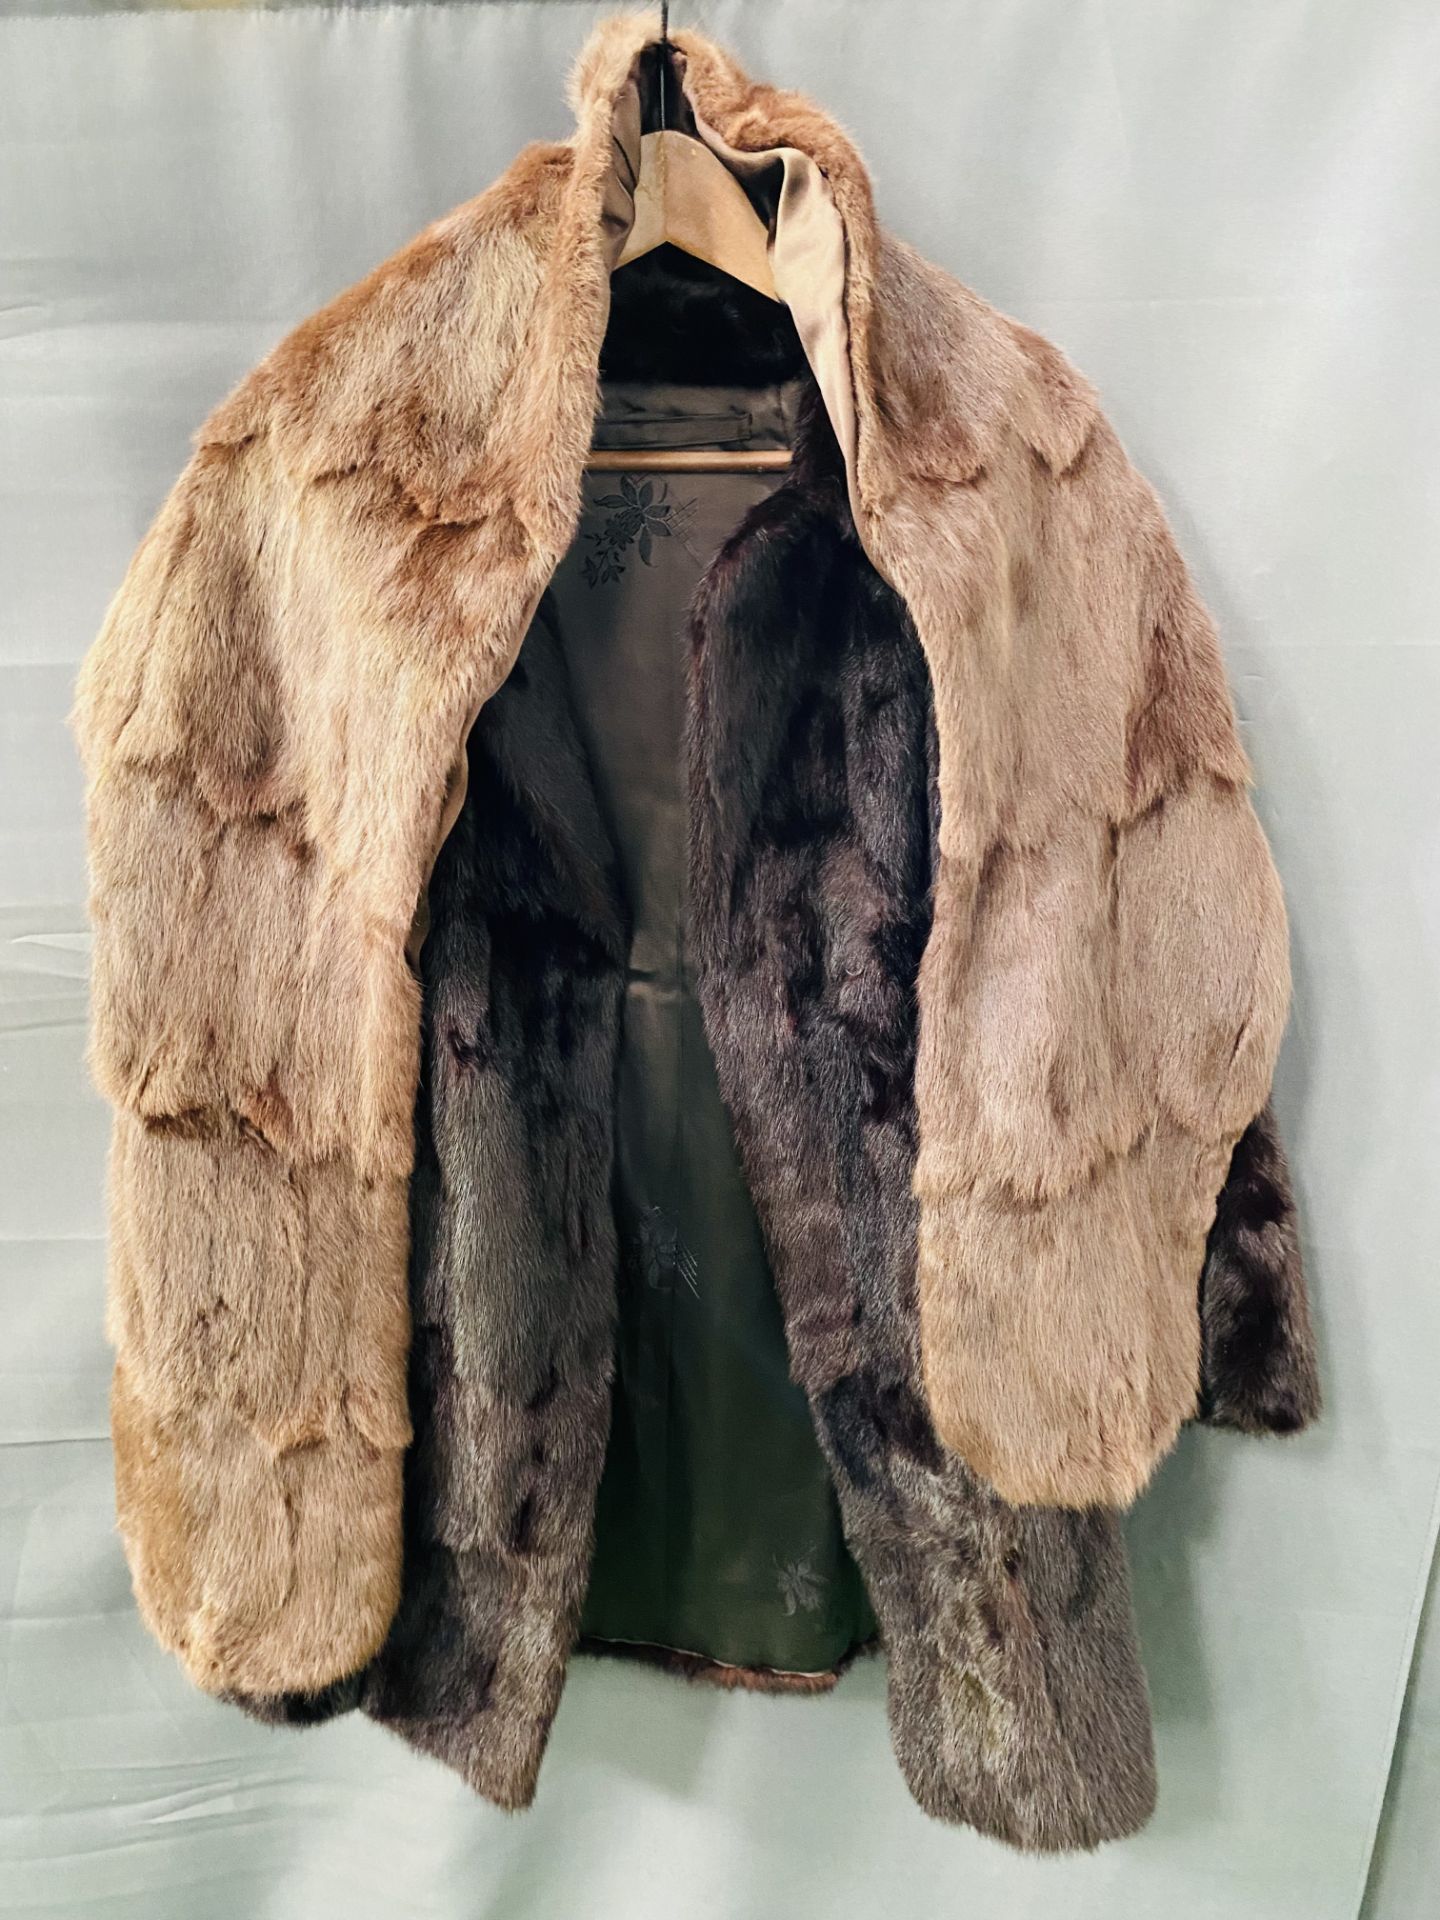 Ladies mink coat together with a fur stole - Image 5 of 5